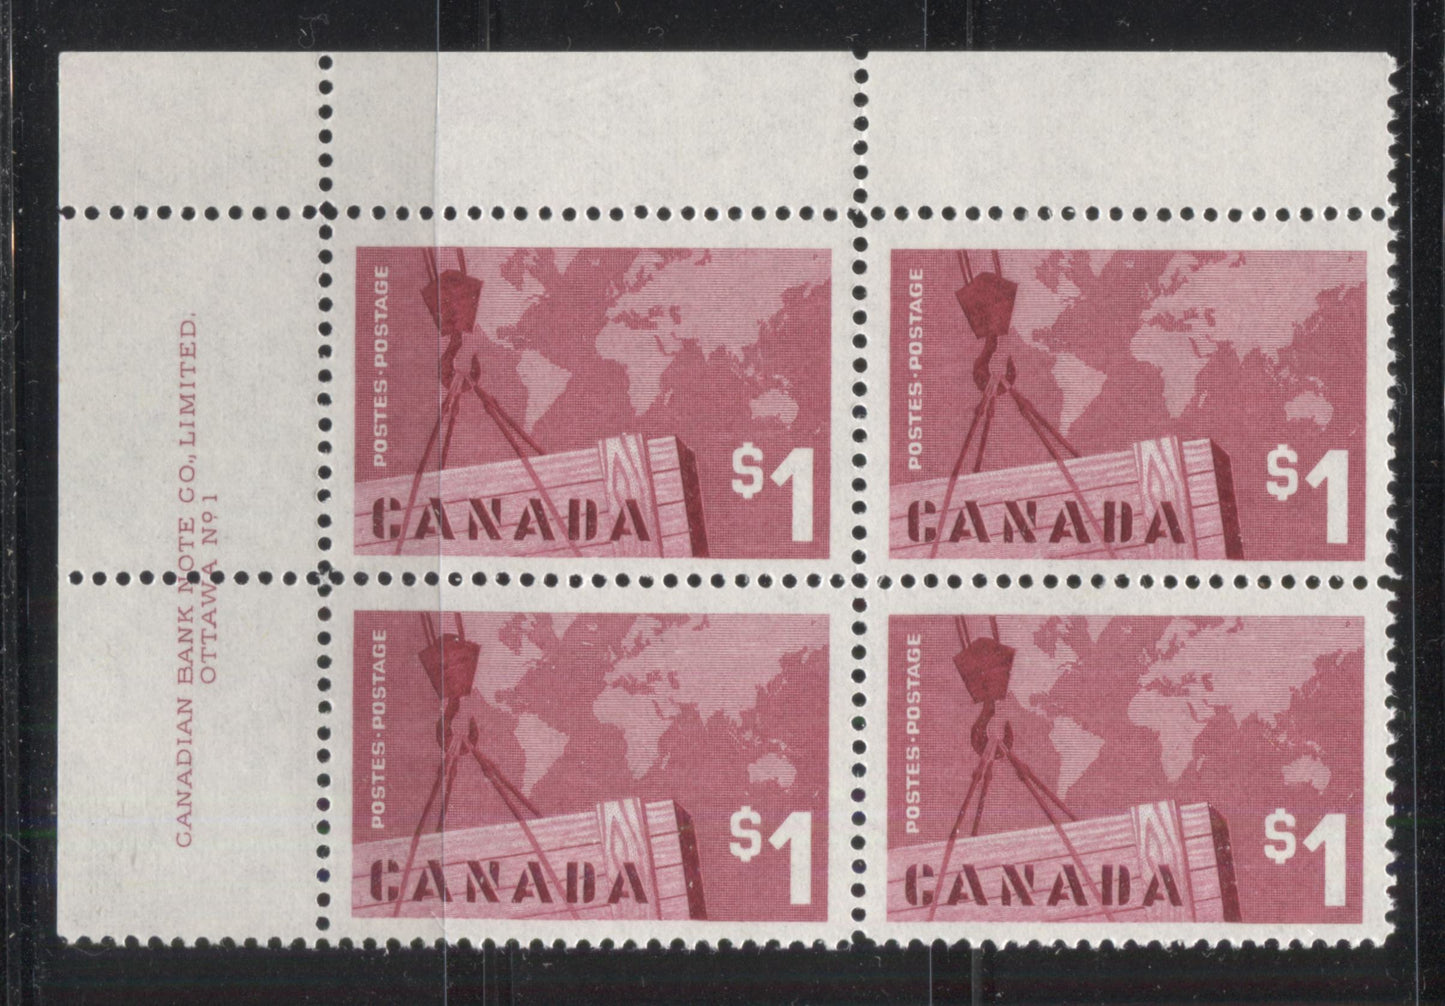 Lot 4 Canada #411 $1 Carmine Rose Crane & Map, 1963 Canadian Exports Issue, A VFNH UL Plate 1 Block Of 4, DF Paper With Light Vertical Ribbing